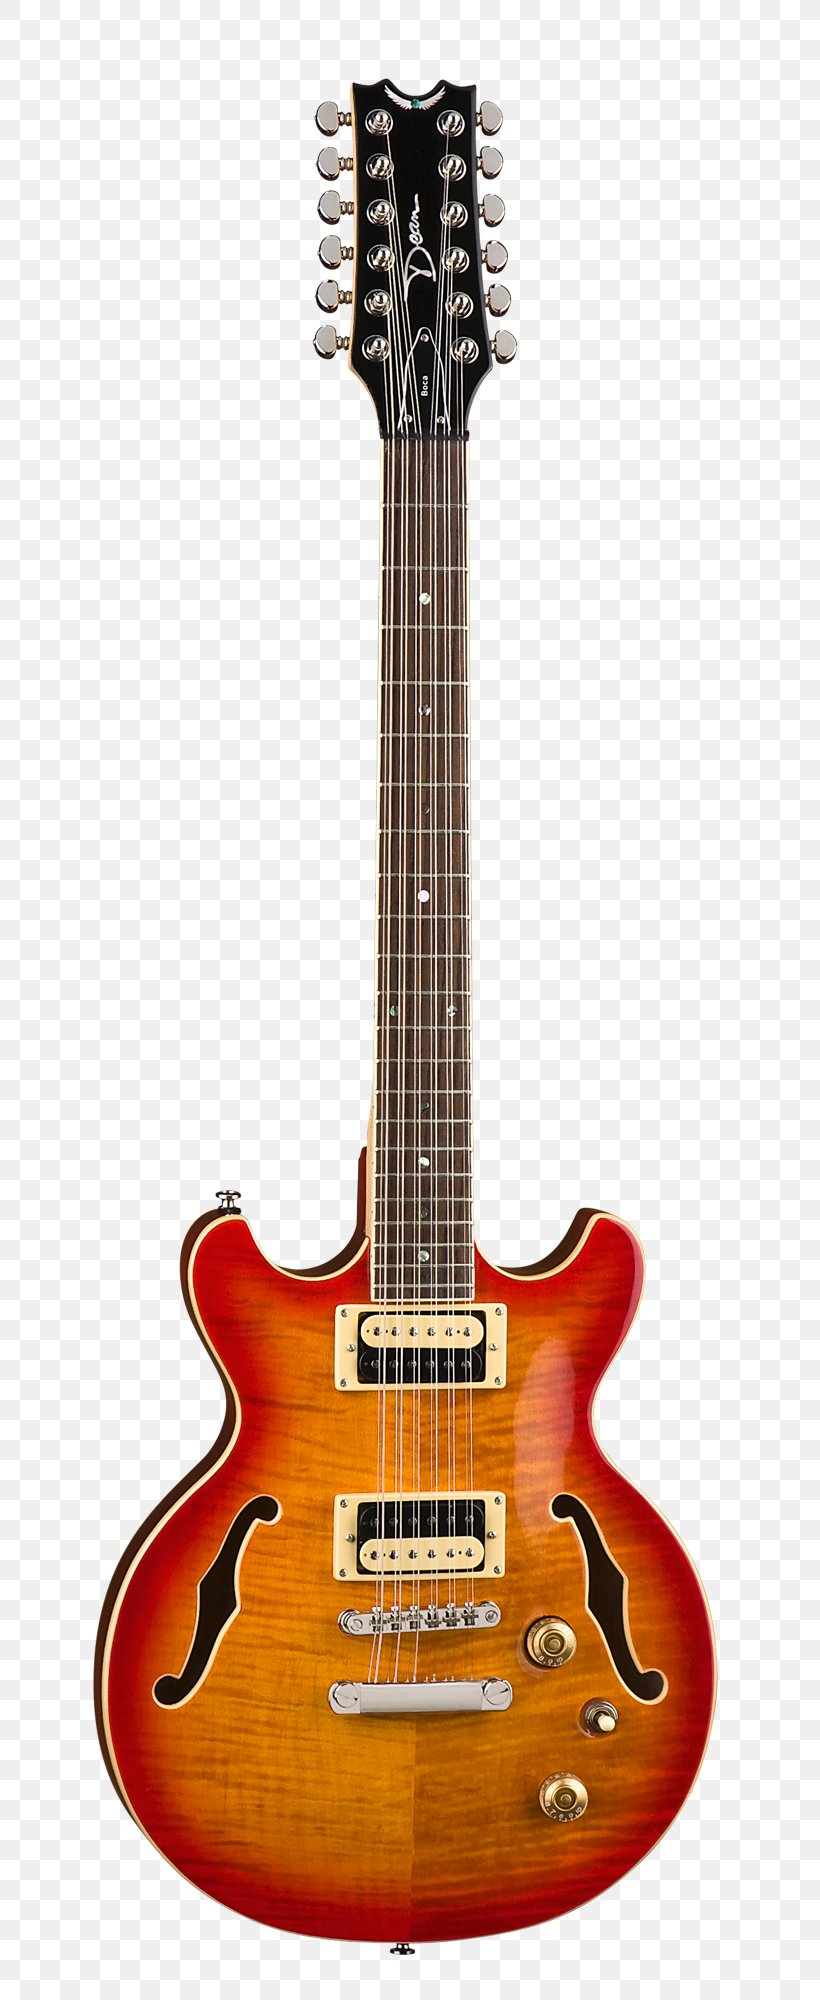 Twelve-string Guitar Dean Guitars Solid Body Electric Guitar Archtop Guitar, PNG, 745x2000px, Twelvestring Guitar, Acoustic Electric Guitar, Acoustic Guitar, Acousticelectric Guitar, Archtop Guitar Download Free